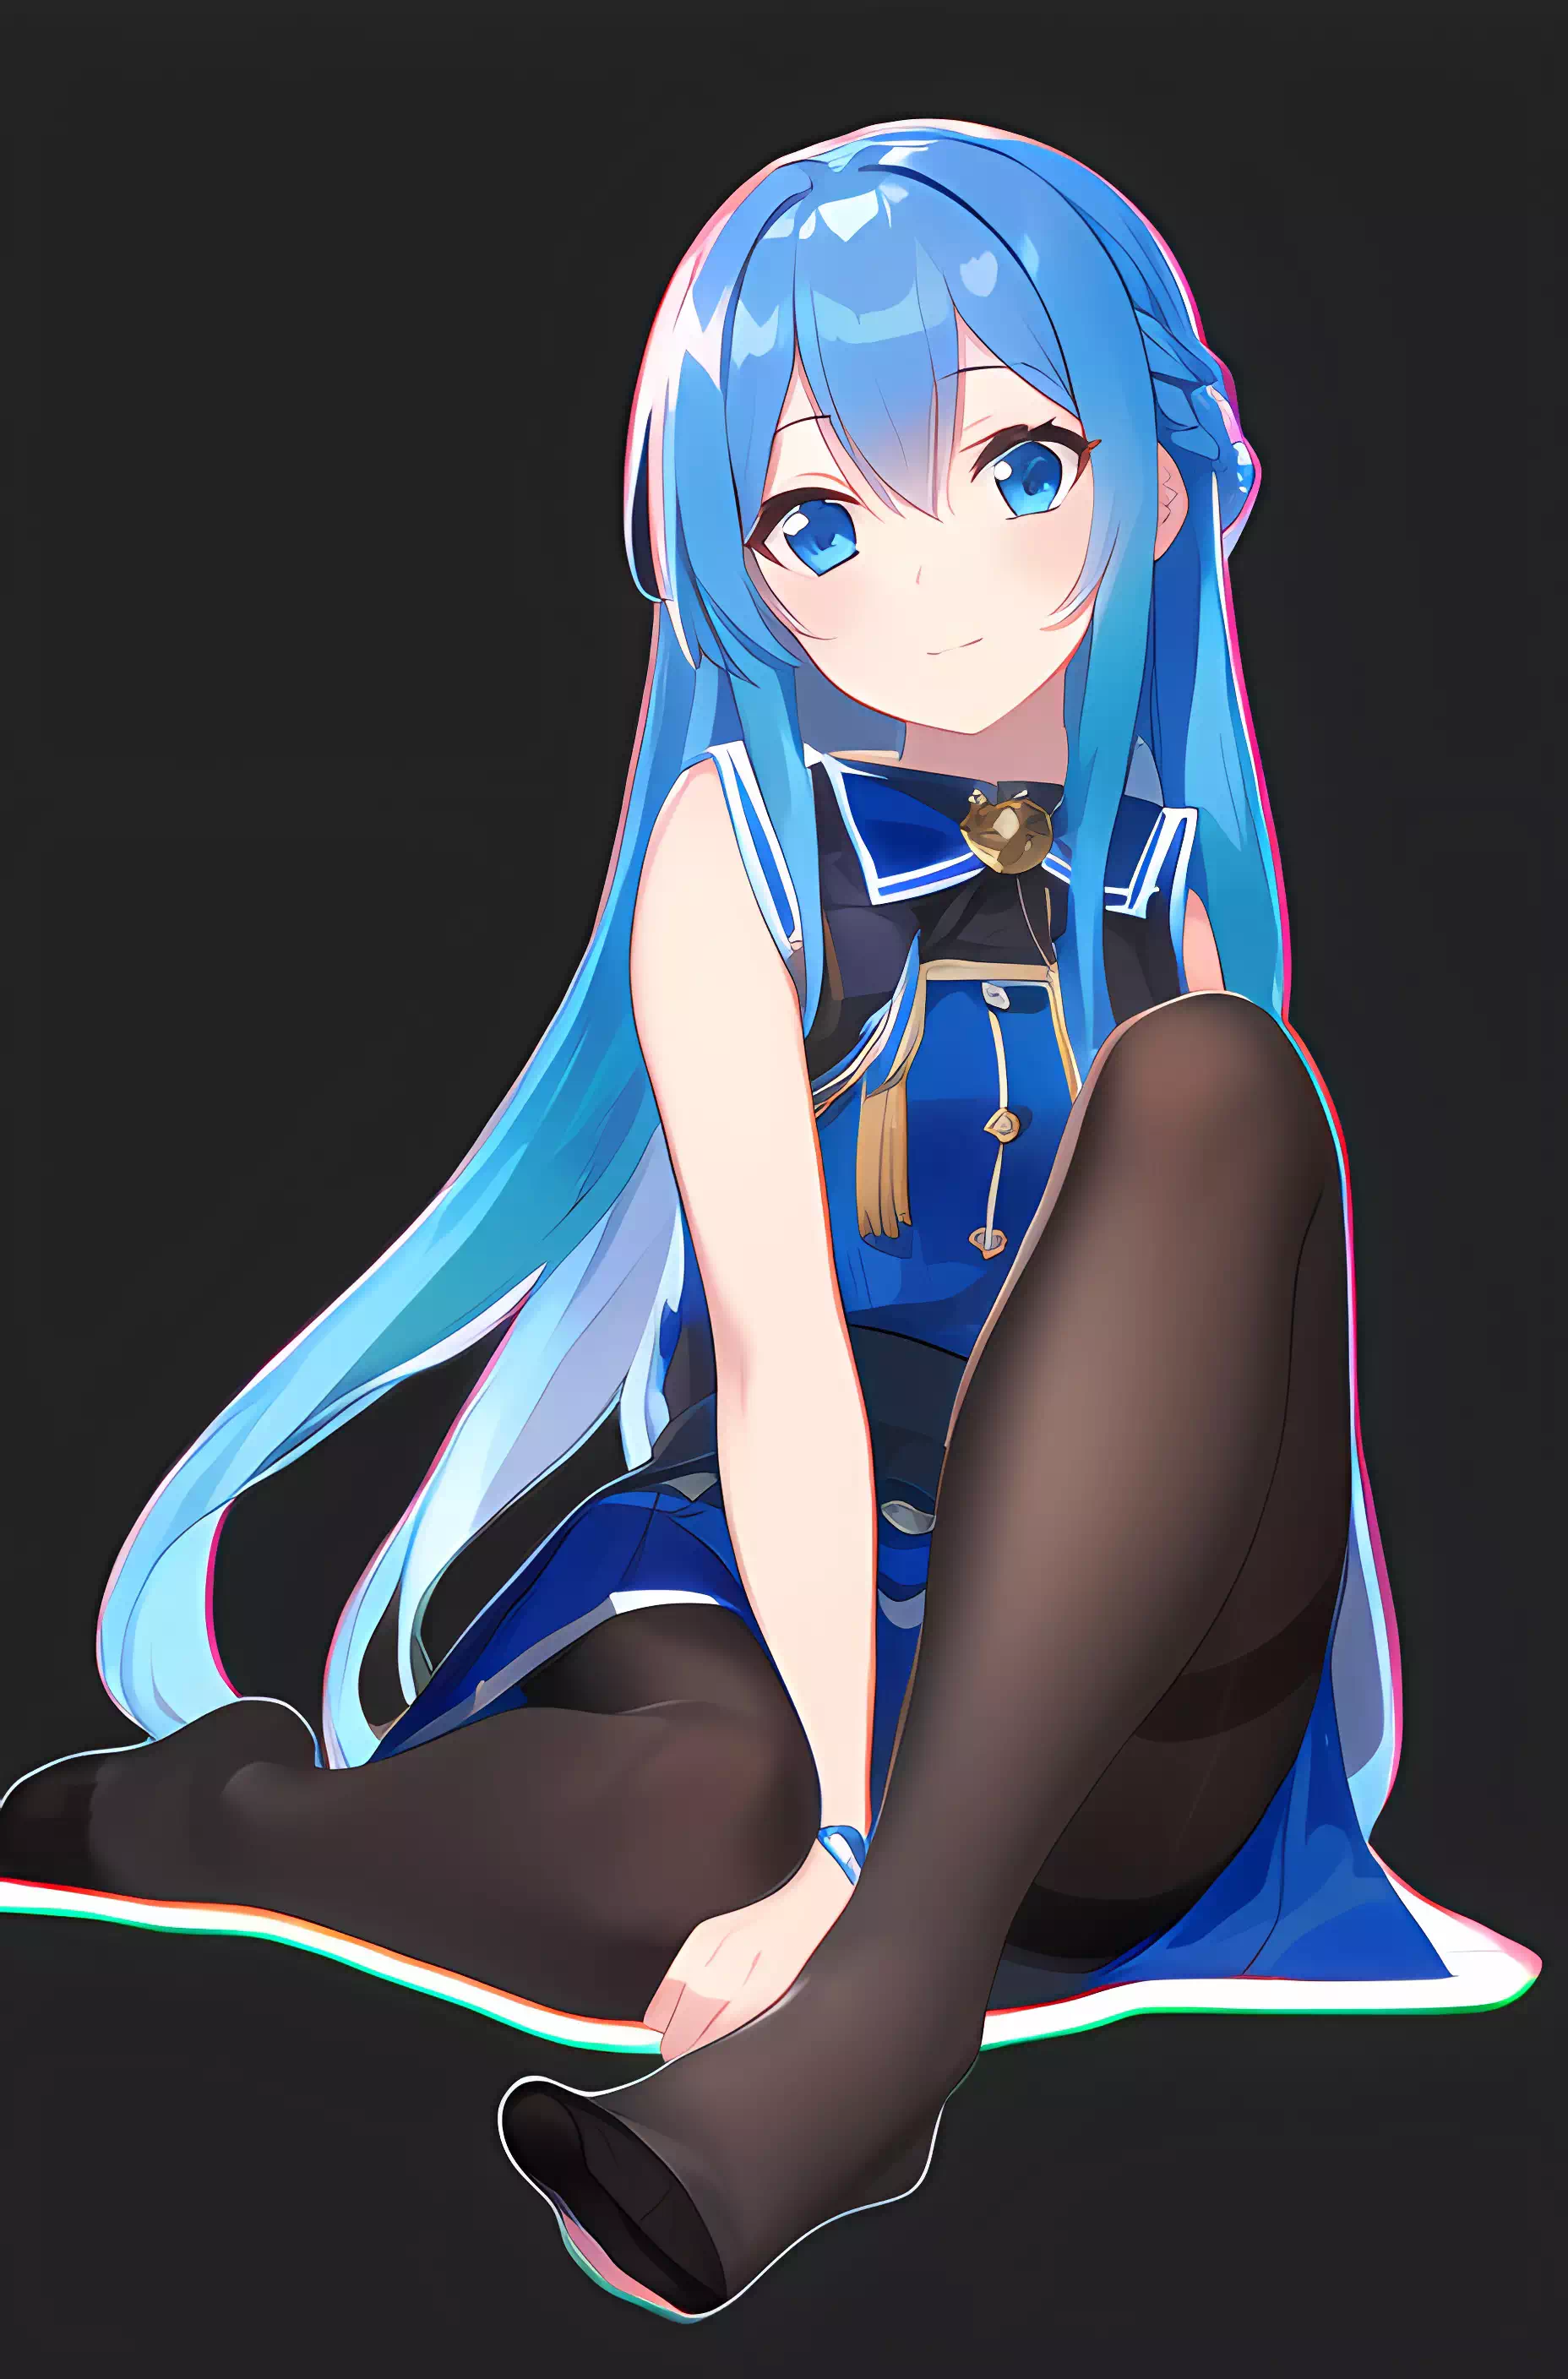 AI chan in tights